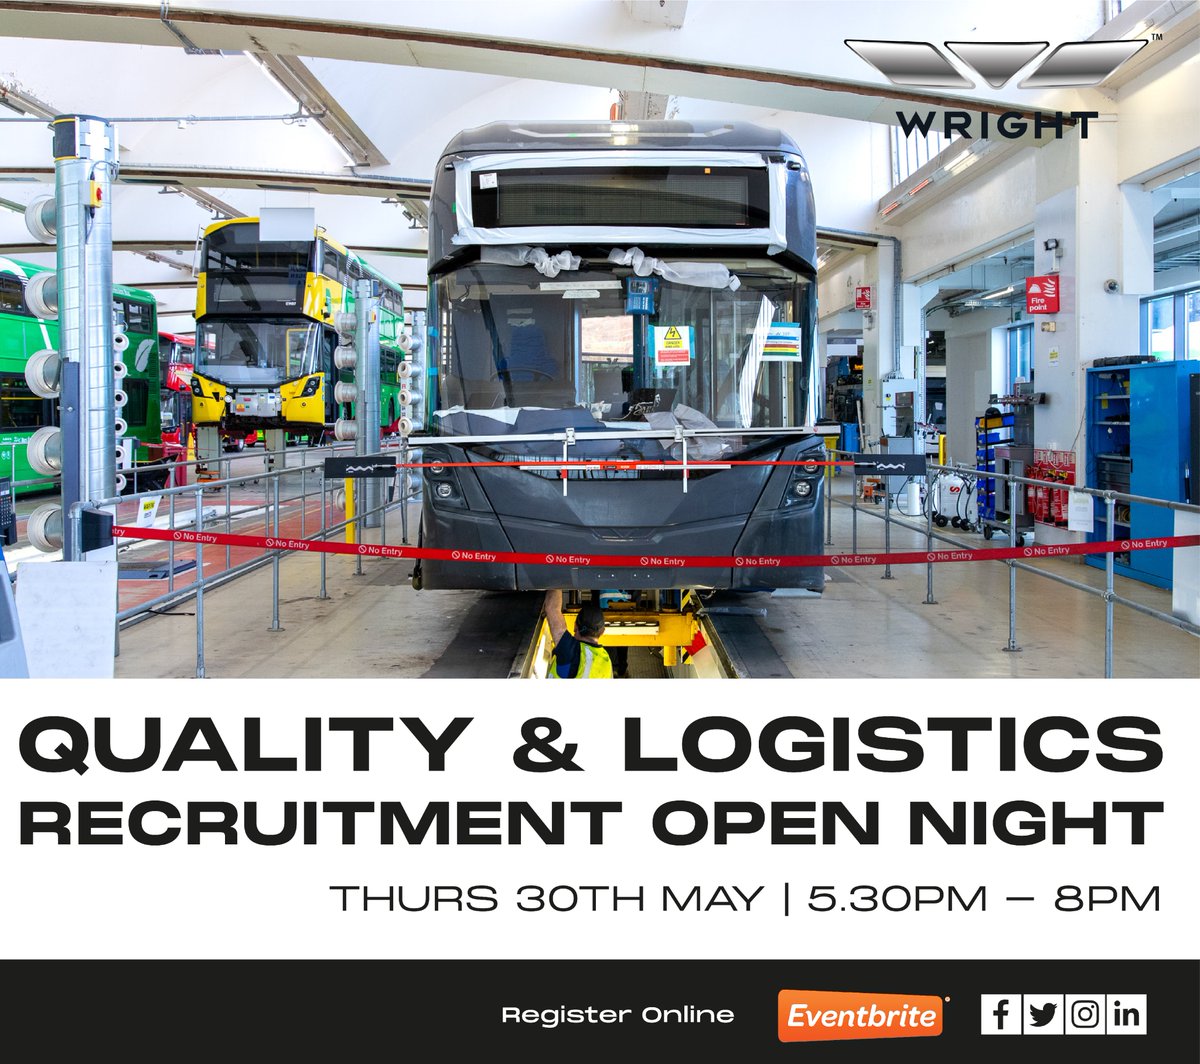 Logistics and Quality Recruitment Open night @Wright_bus | Thursday 30th May from 5.30-8pm.
 
 Register online: eventbrite.co.uk/e/wrightbus-re… or email hr@wrightbus.com
 
 #Wrightbus #Recruiting #Logisticsjobs #QualityJobs #GreenJobs #ManufacturingNI #DrivingAGreenerFuture